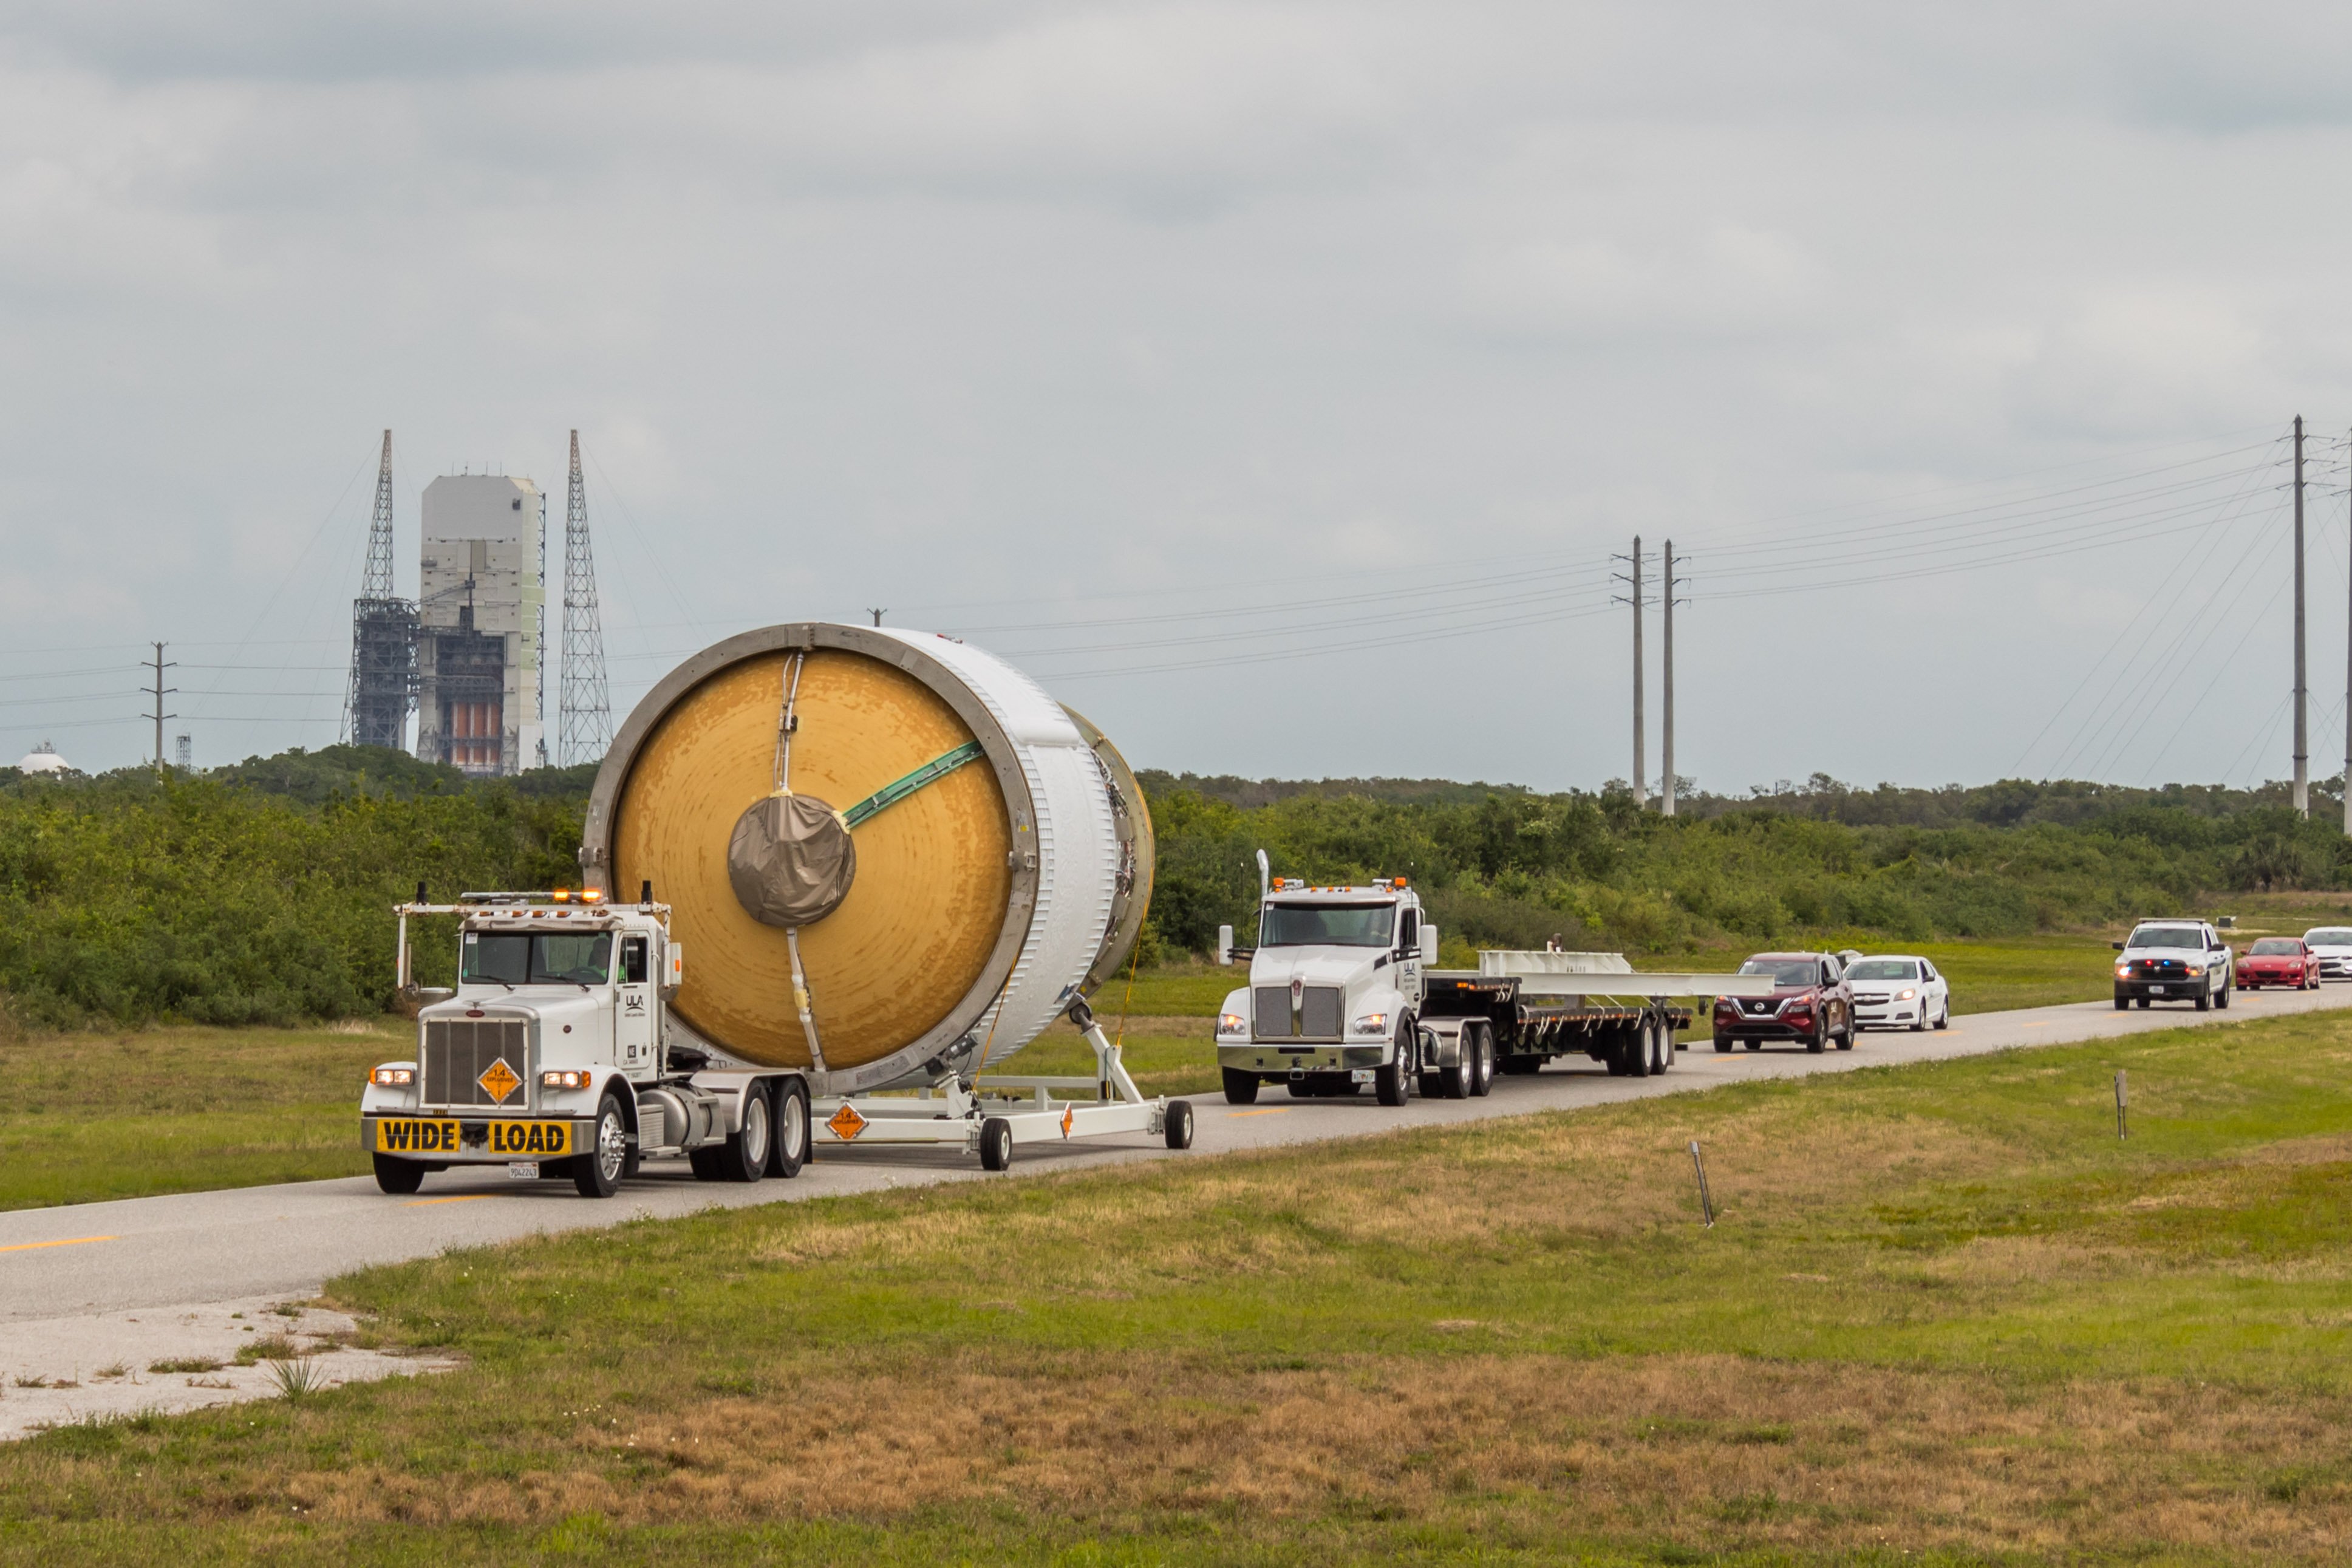 ICPS-2: ULA begins readying upper stage for Artemis II launch